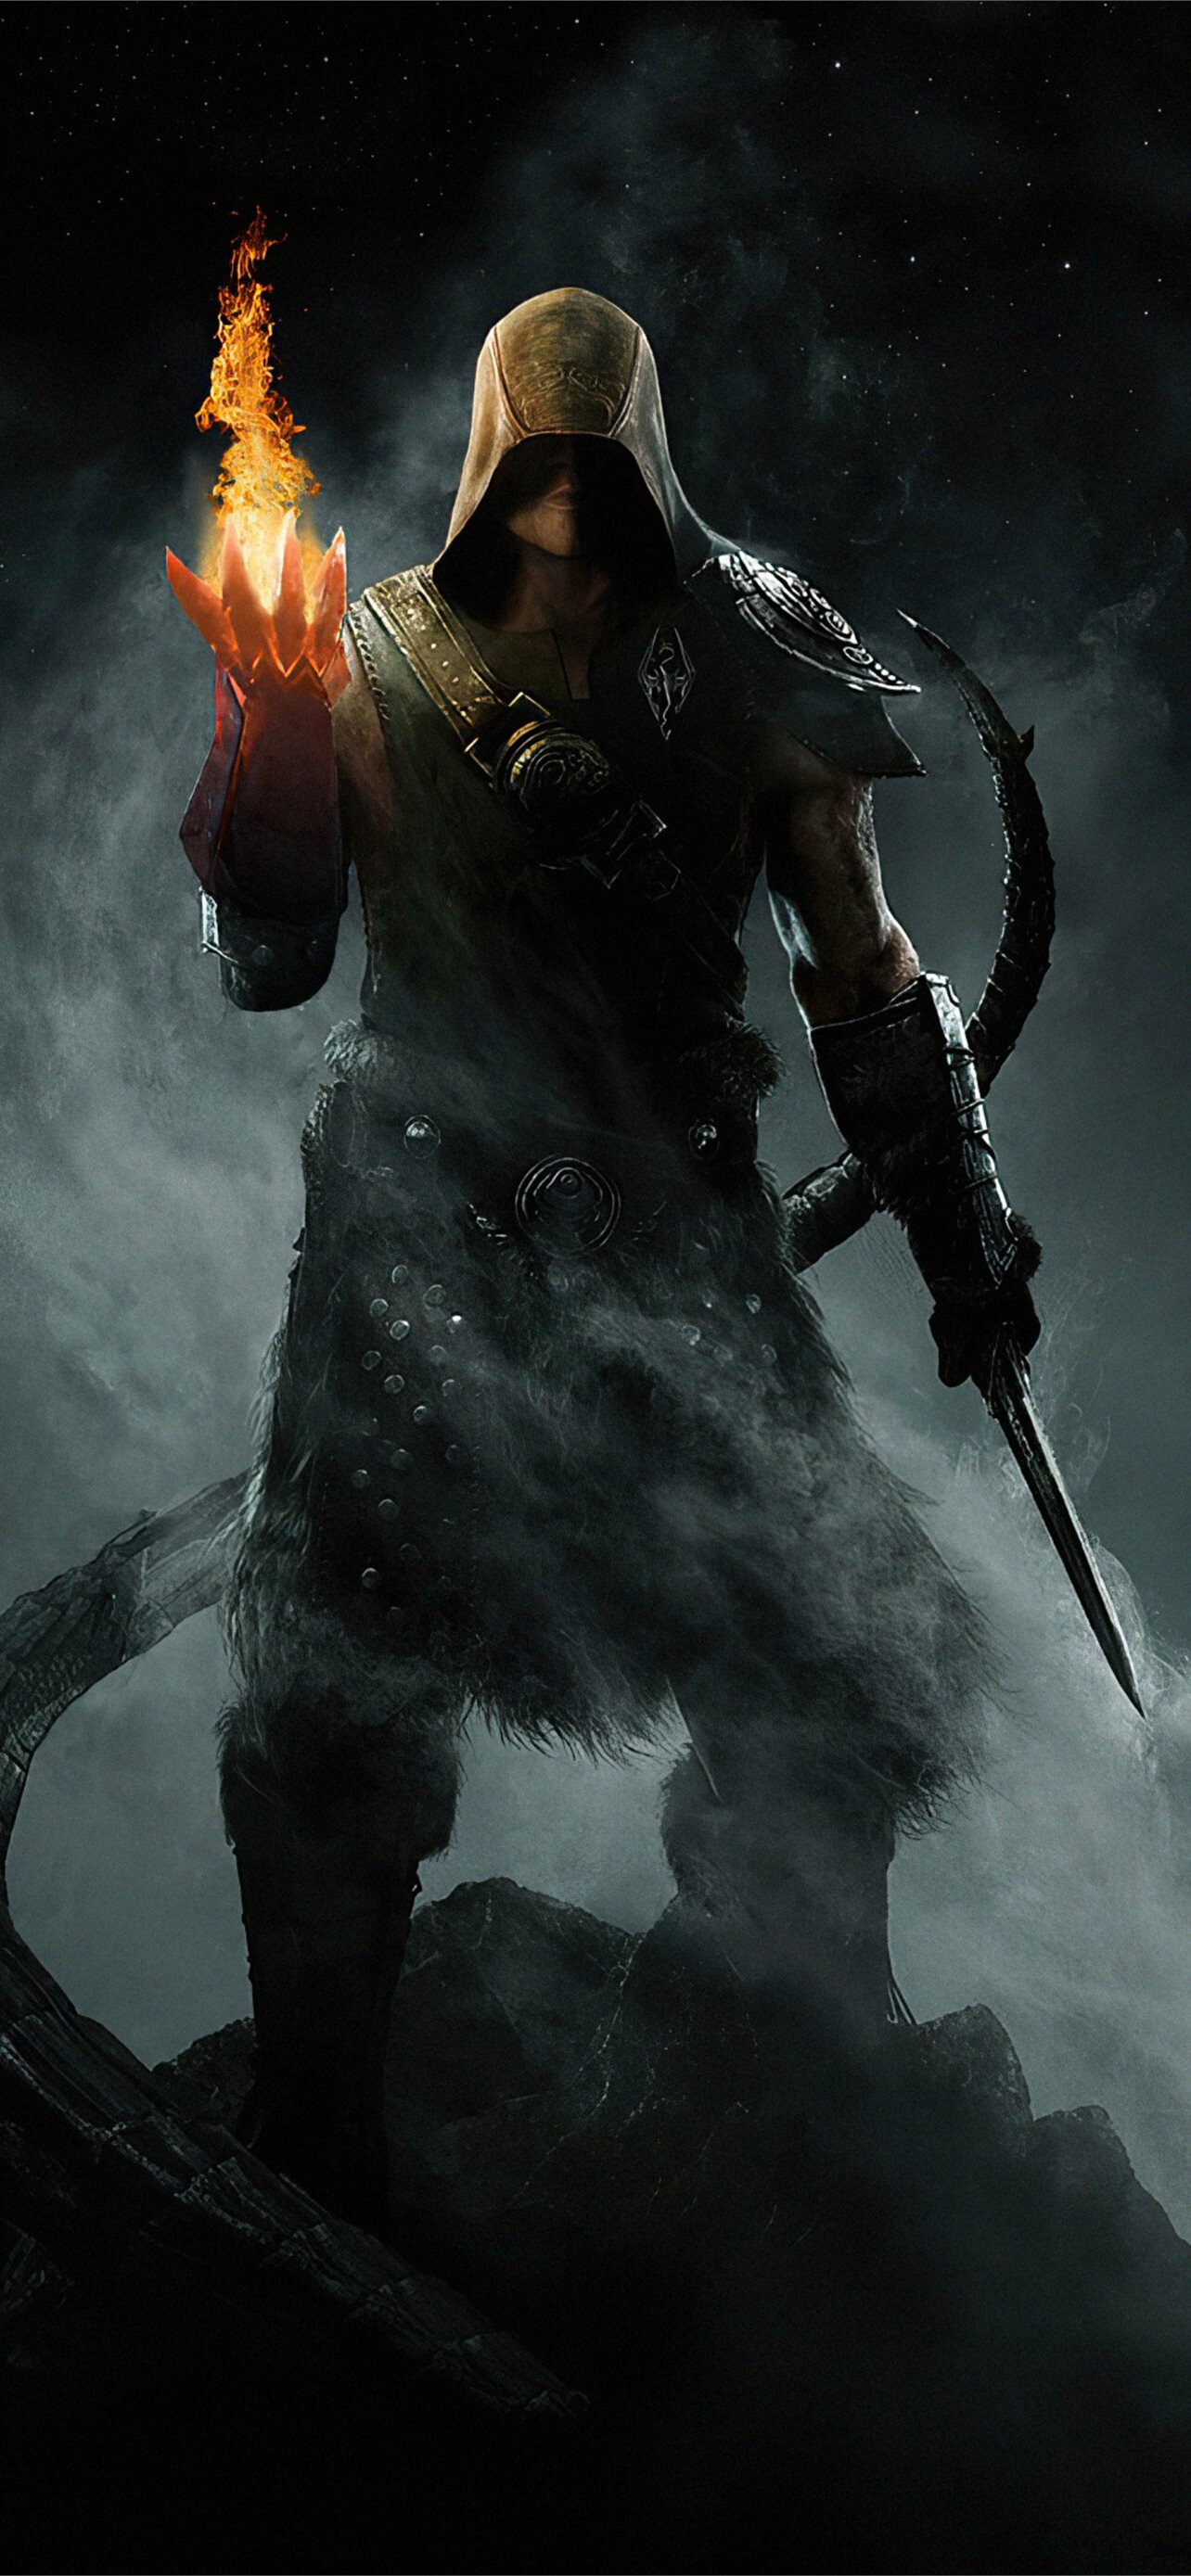 The Elder Scrolls: Skyrim, Awarded 'Game of the Year' by IGN. 1290x2780 HD Background.